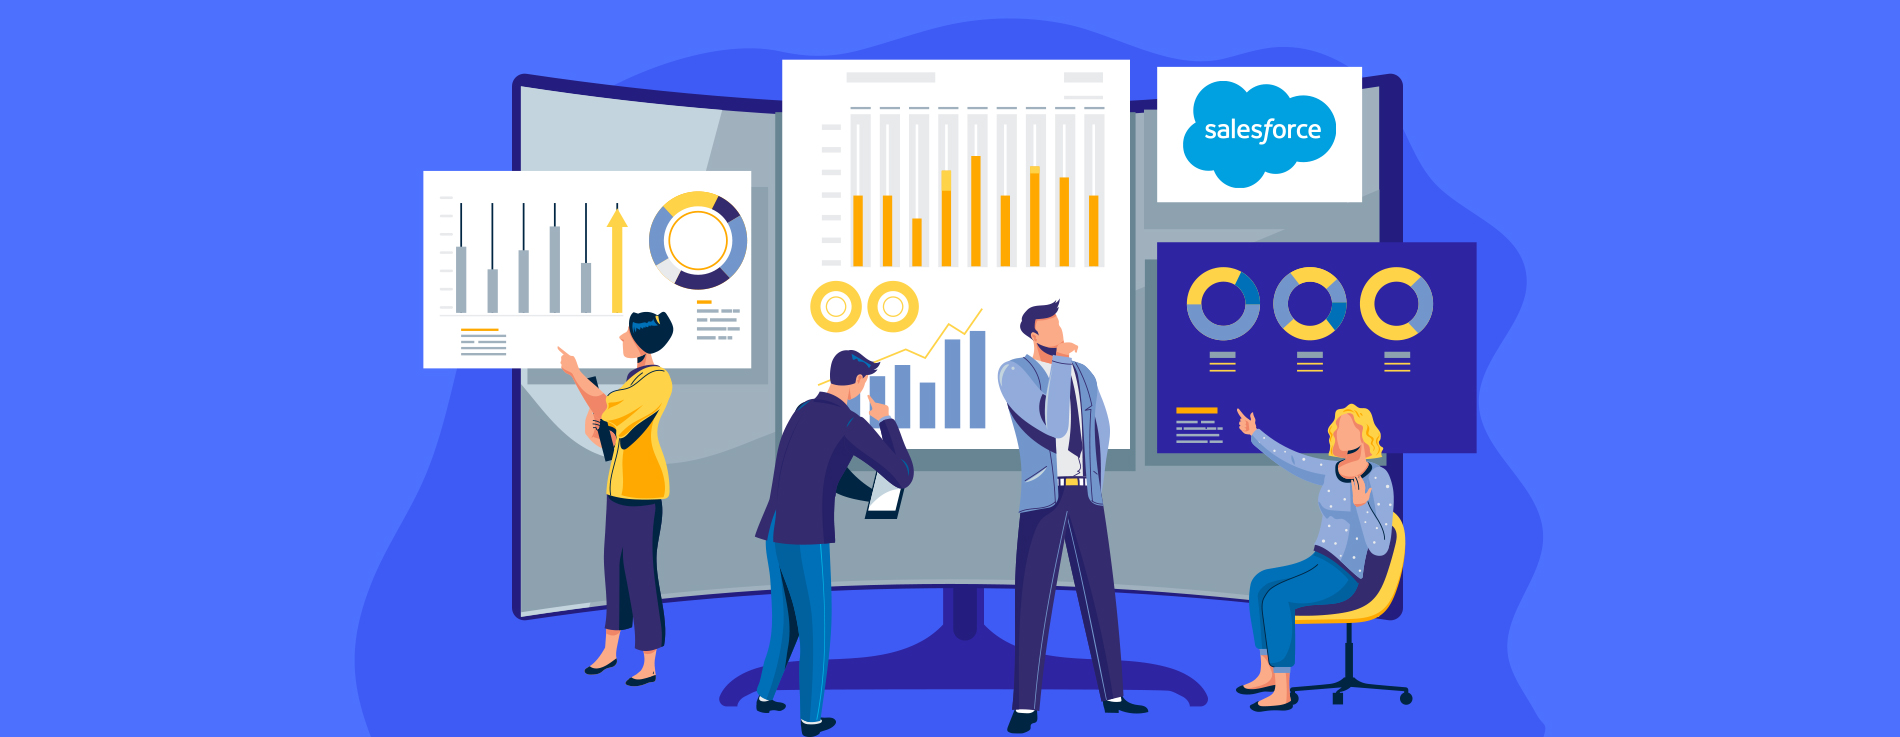 Salesforce Analytics Cloud - Features and Benefits